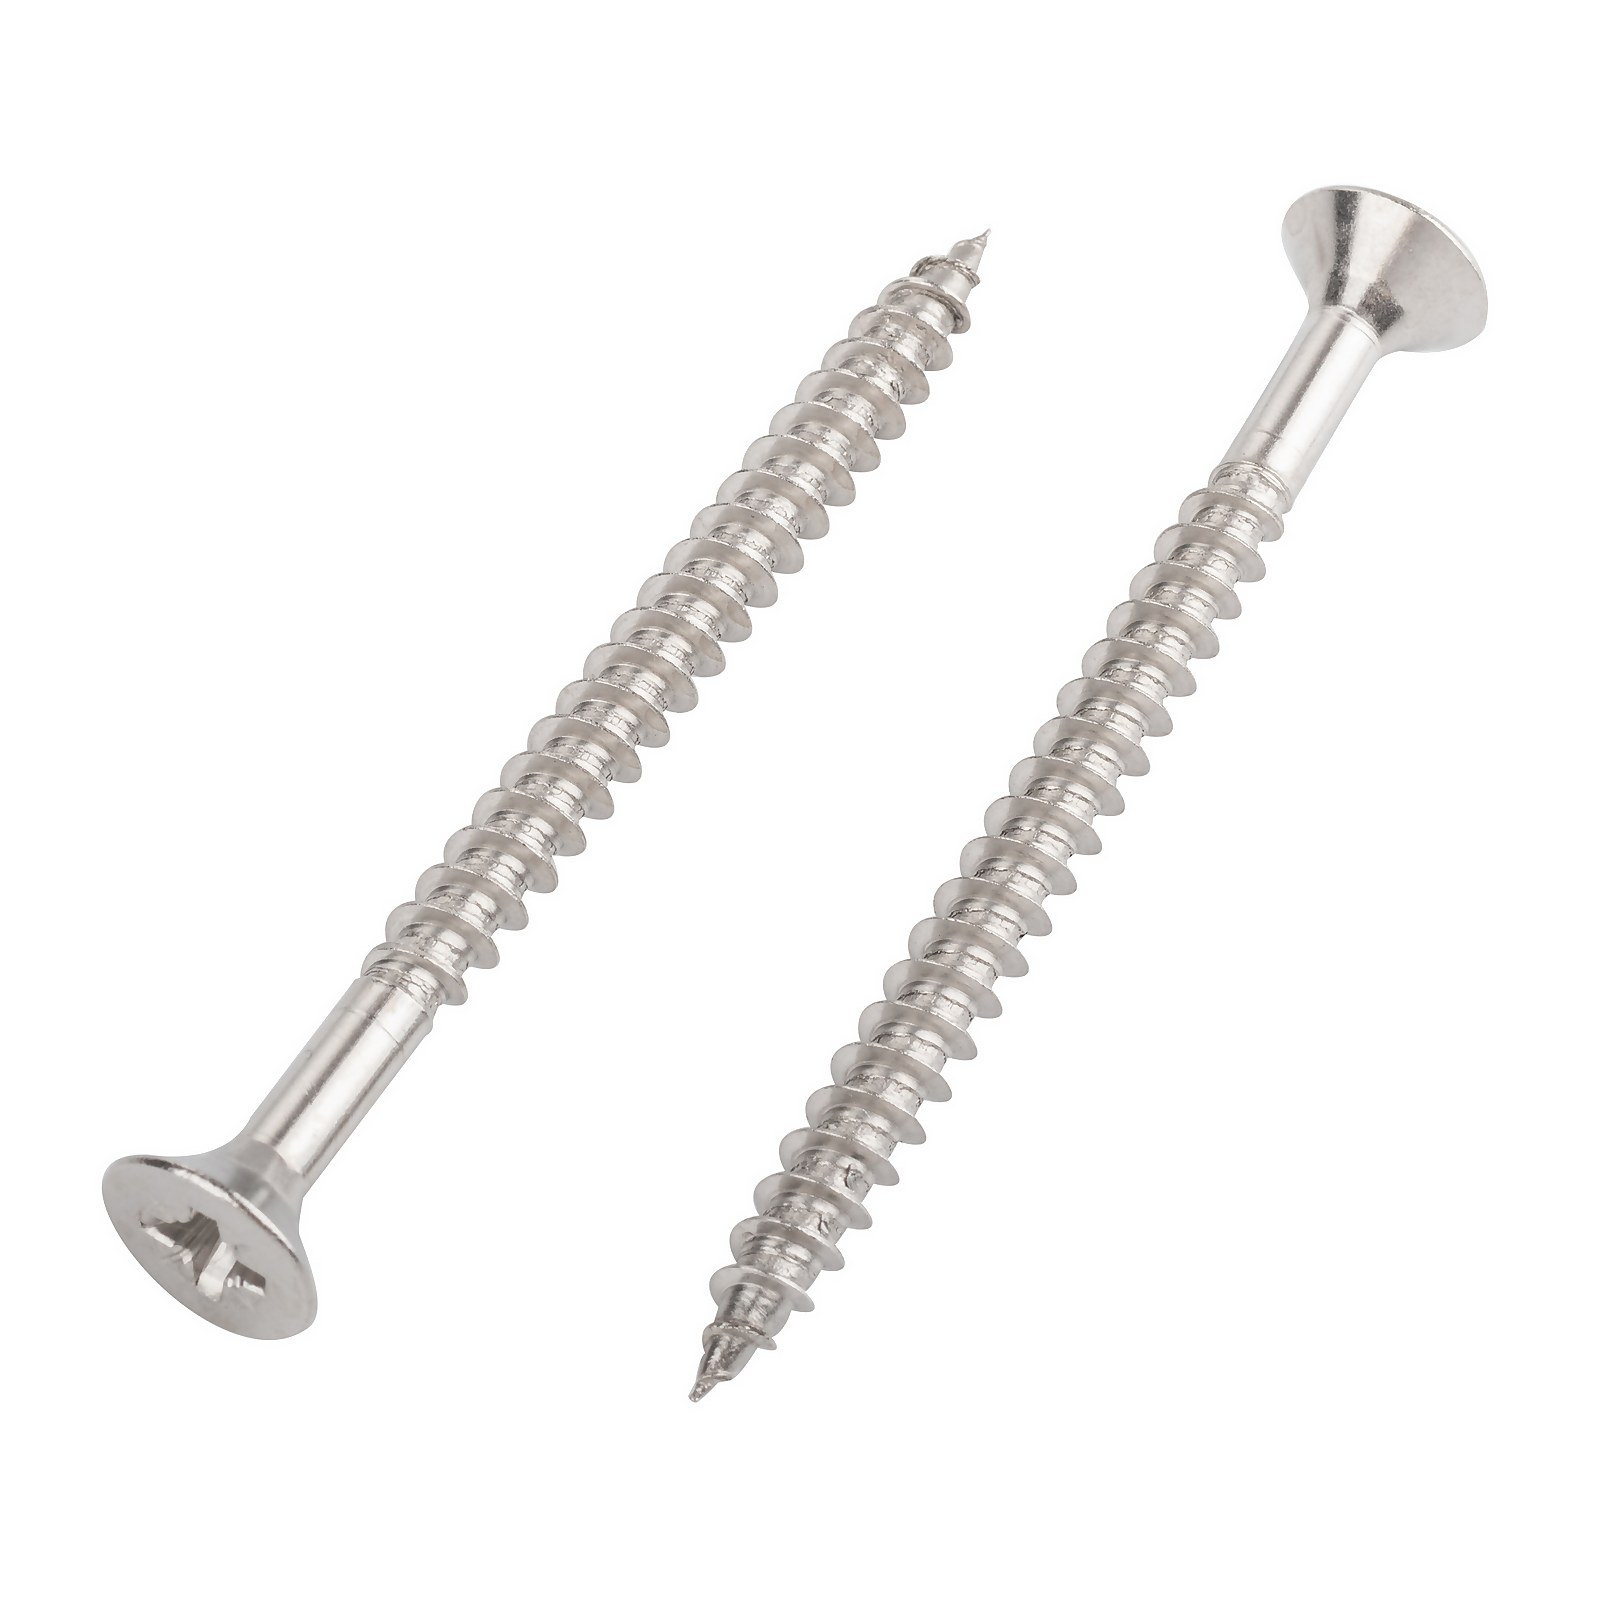 Photo of Homebase Stainless Steel Single Thread Screw 6 X 75mm 25 Pack